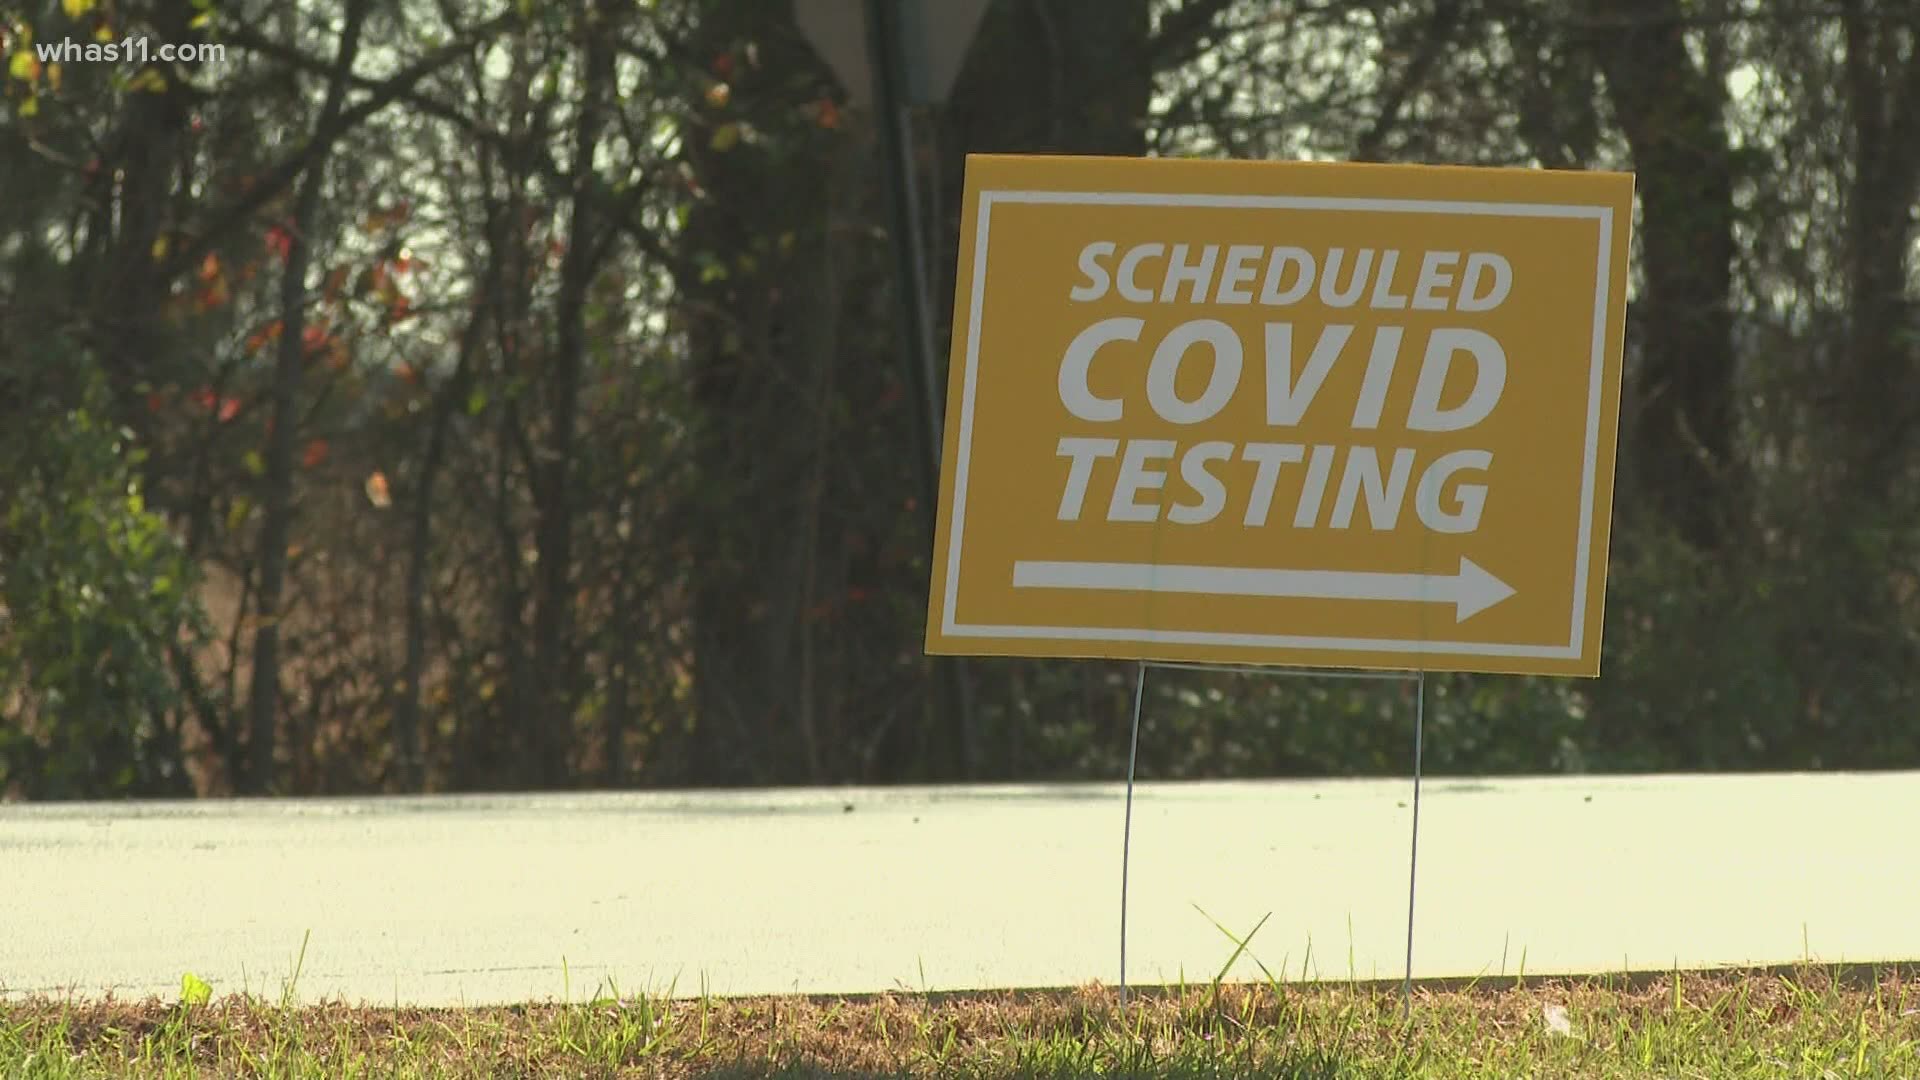 The health department says the move comes as they shift focus onto getting school employees vaccinated.